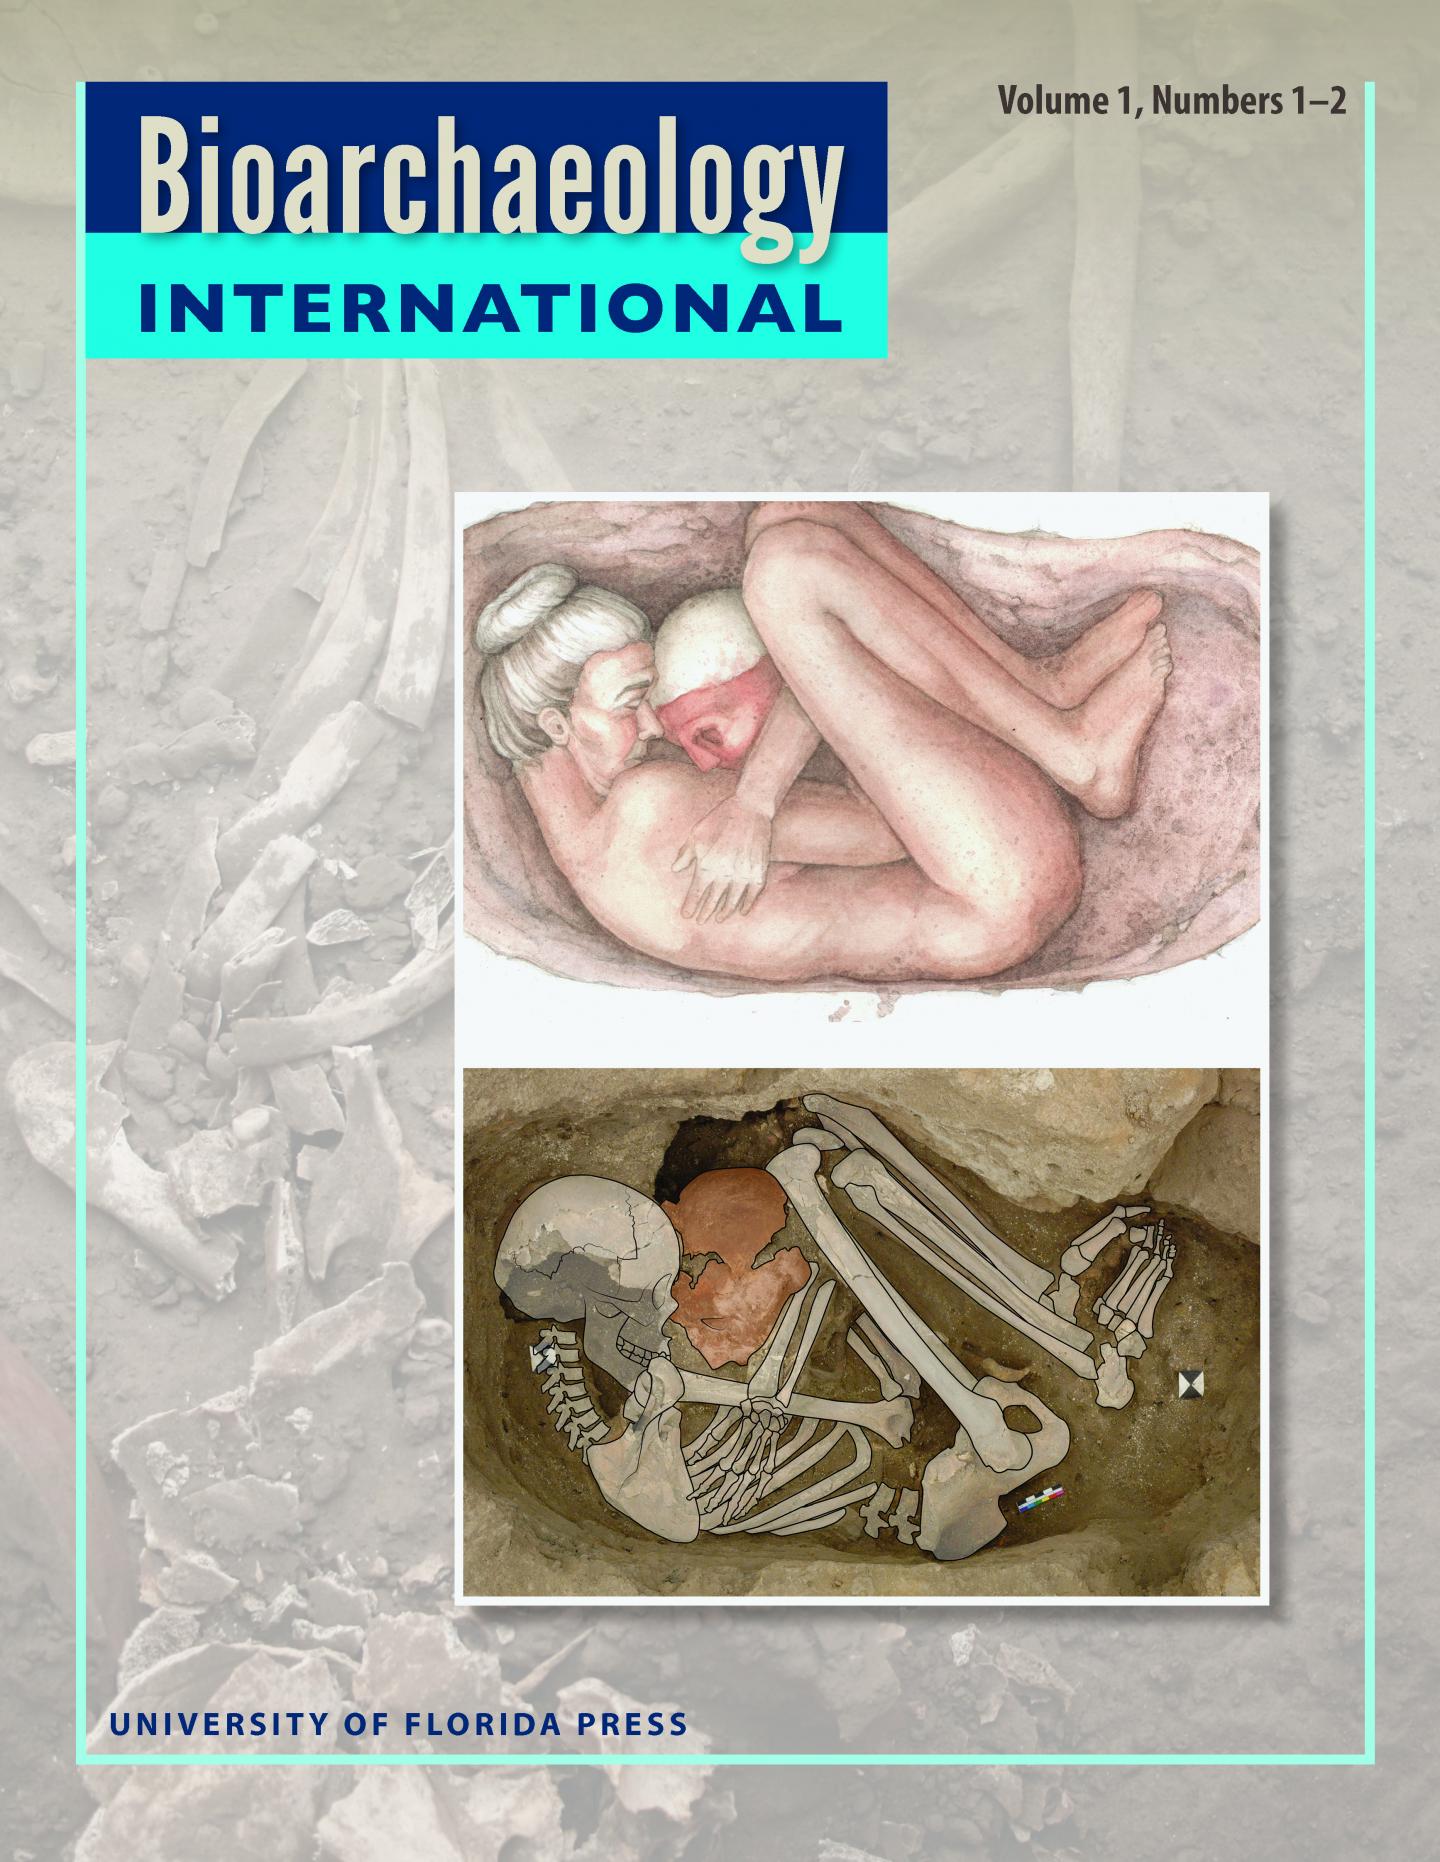 First Volume Cover of Bioarchaeology International